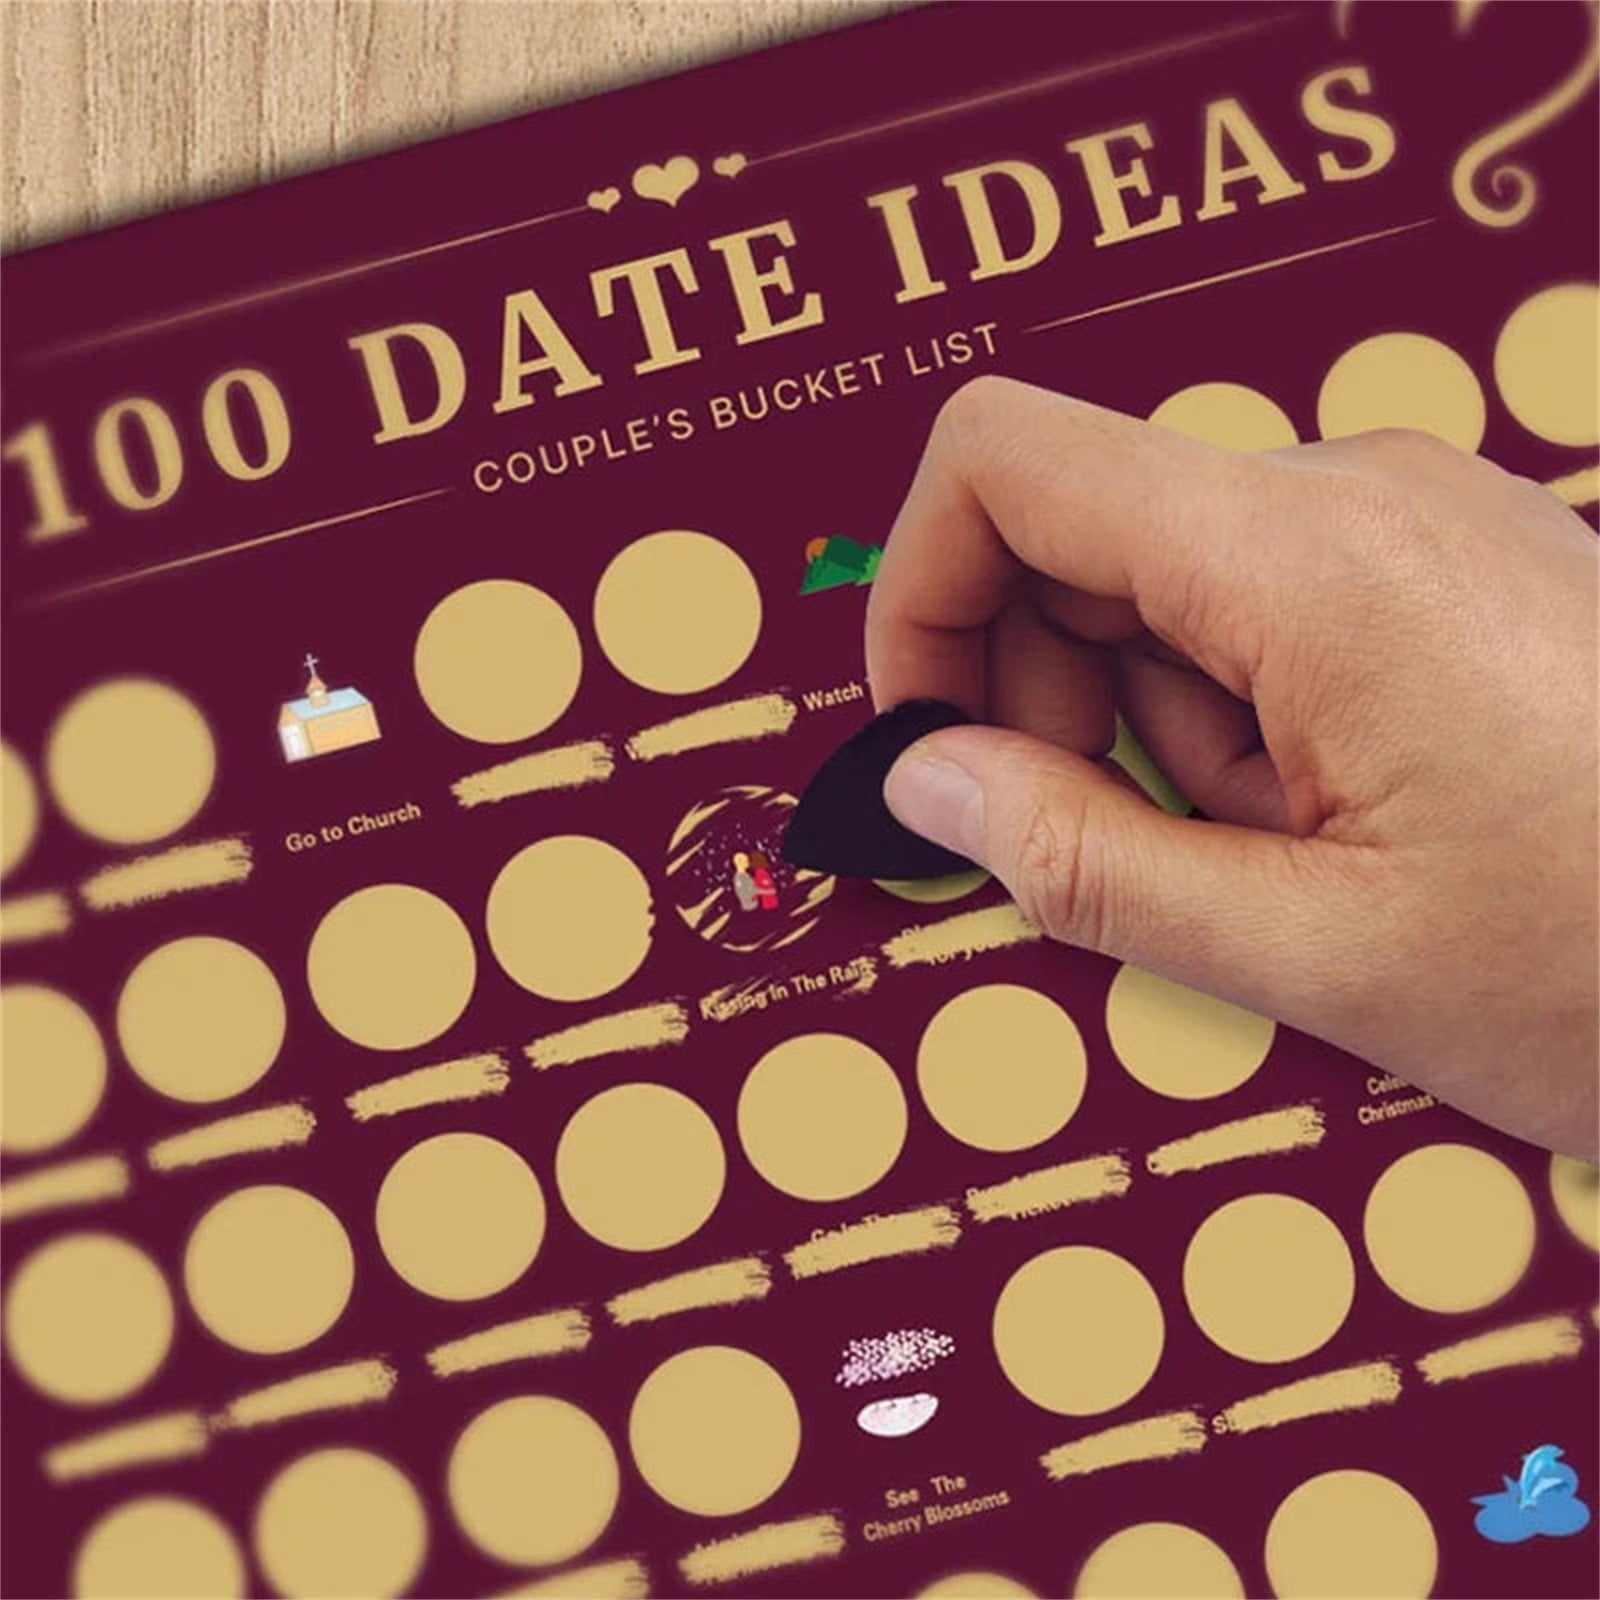 KEUSN 100 Dates Ideas Scratch Off Poster Engagement Gifts For Her Date  Night Anniversary For Couples Birthday Gifts For Women Wedding Gifts  Matching Couples Stuff 